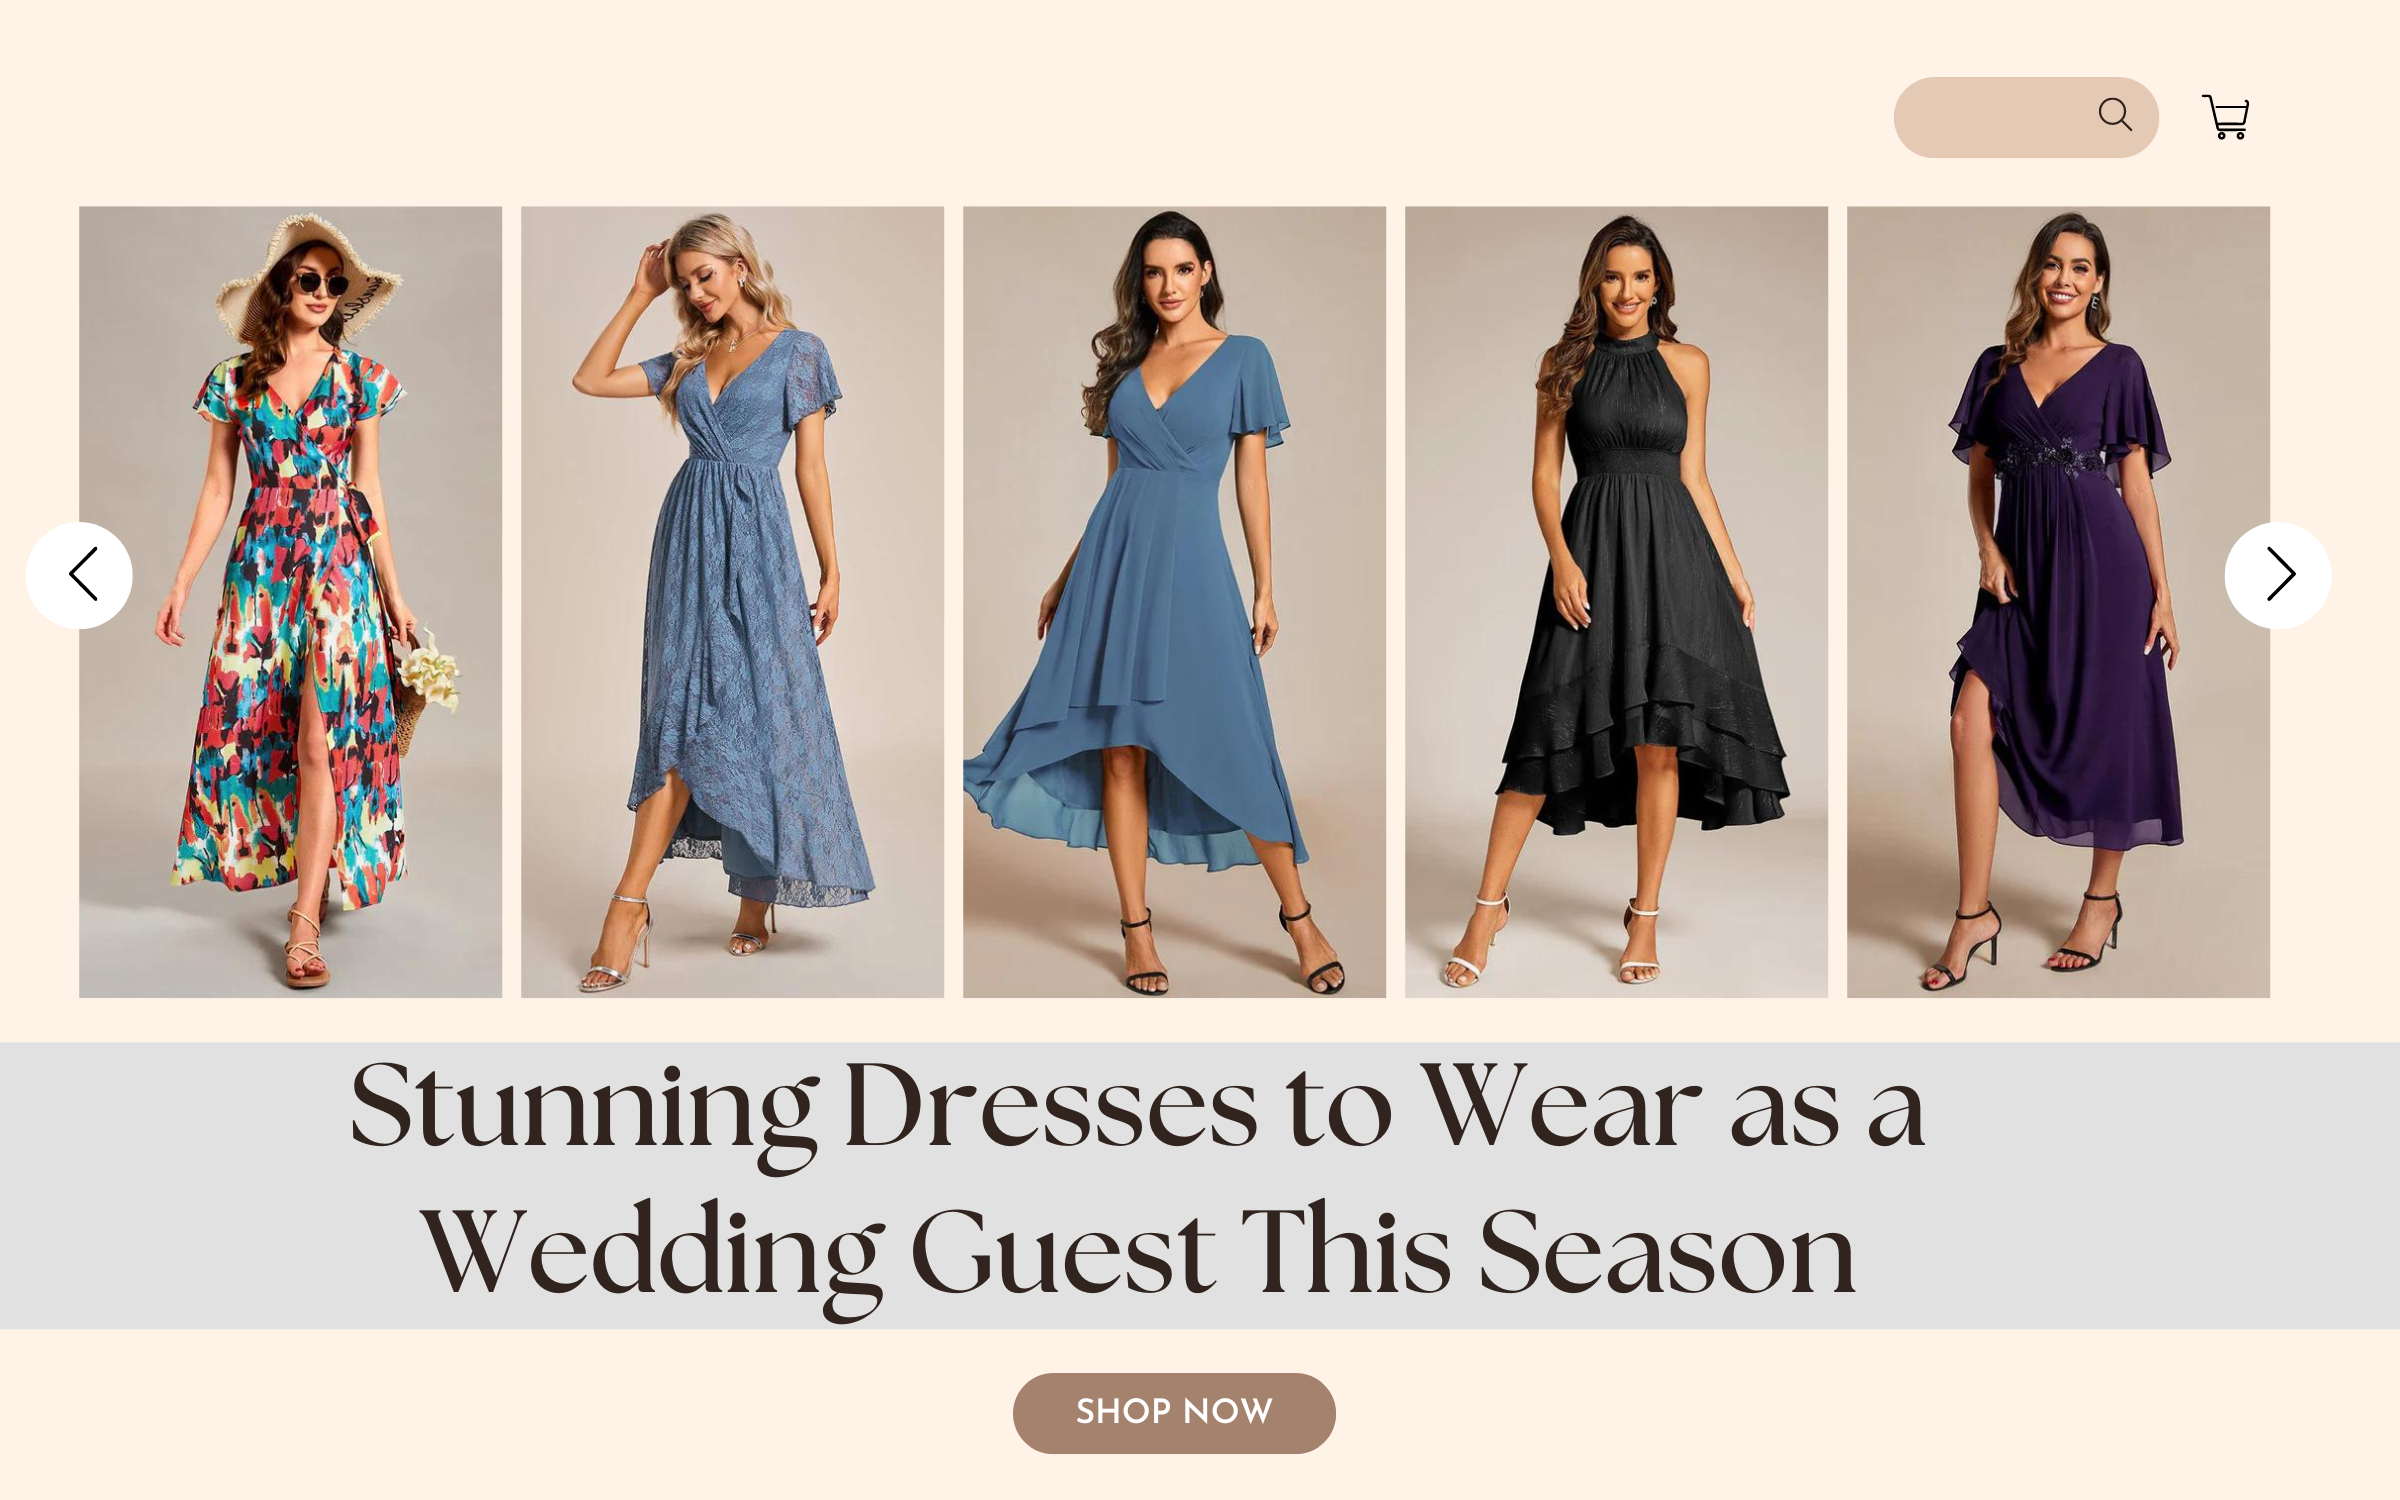 Top 10 Stunning Dresses to Wear as a Wedding Guest This Season